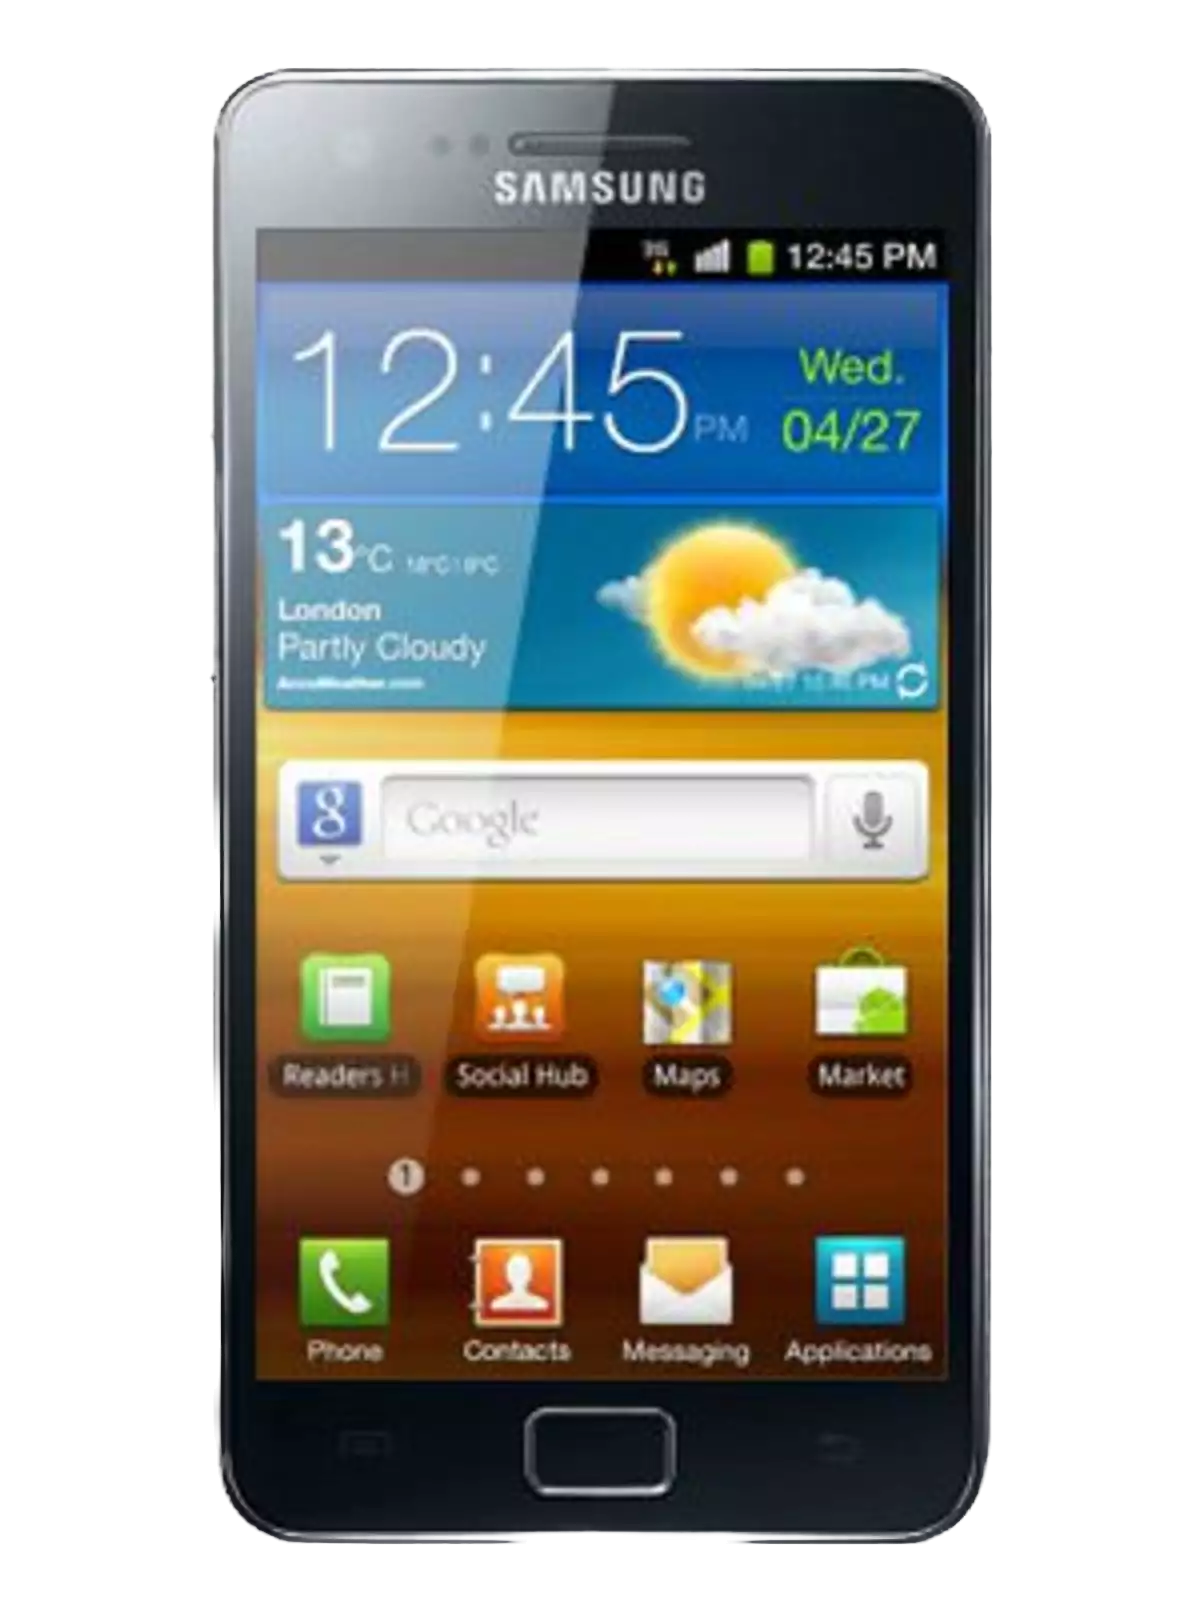 A render of the Samsung Galaxy S2.